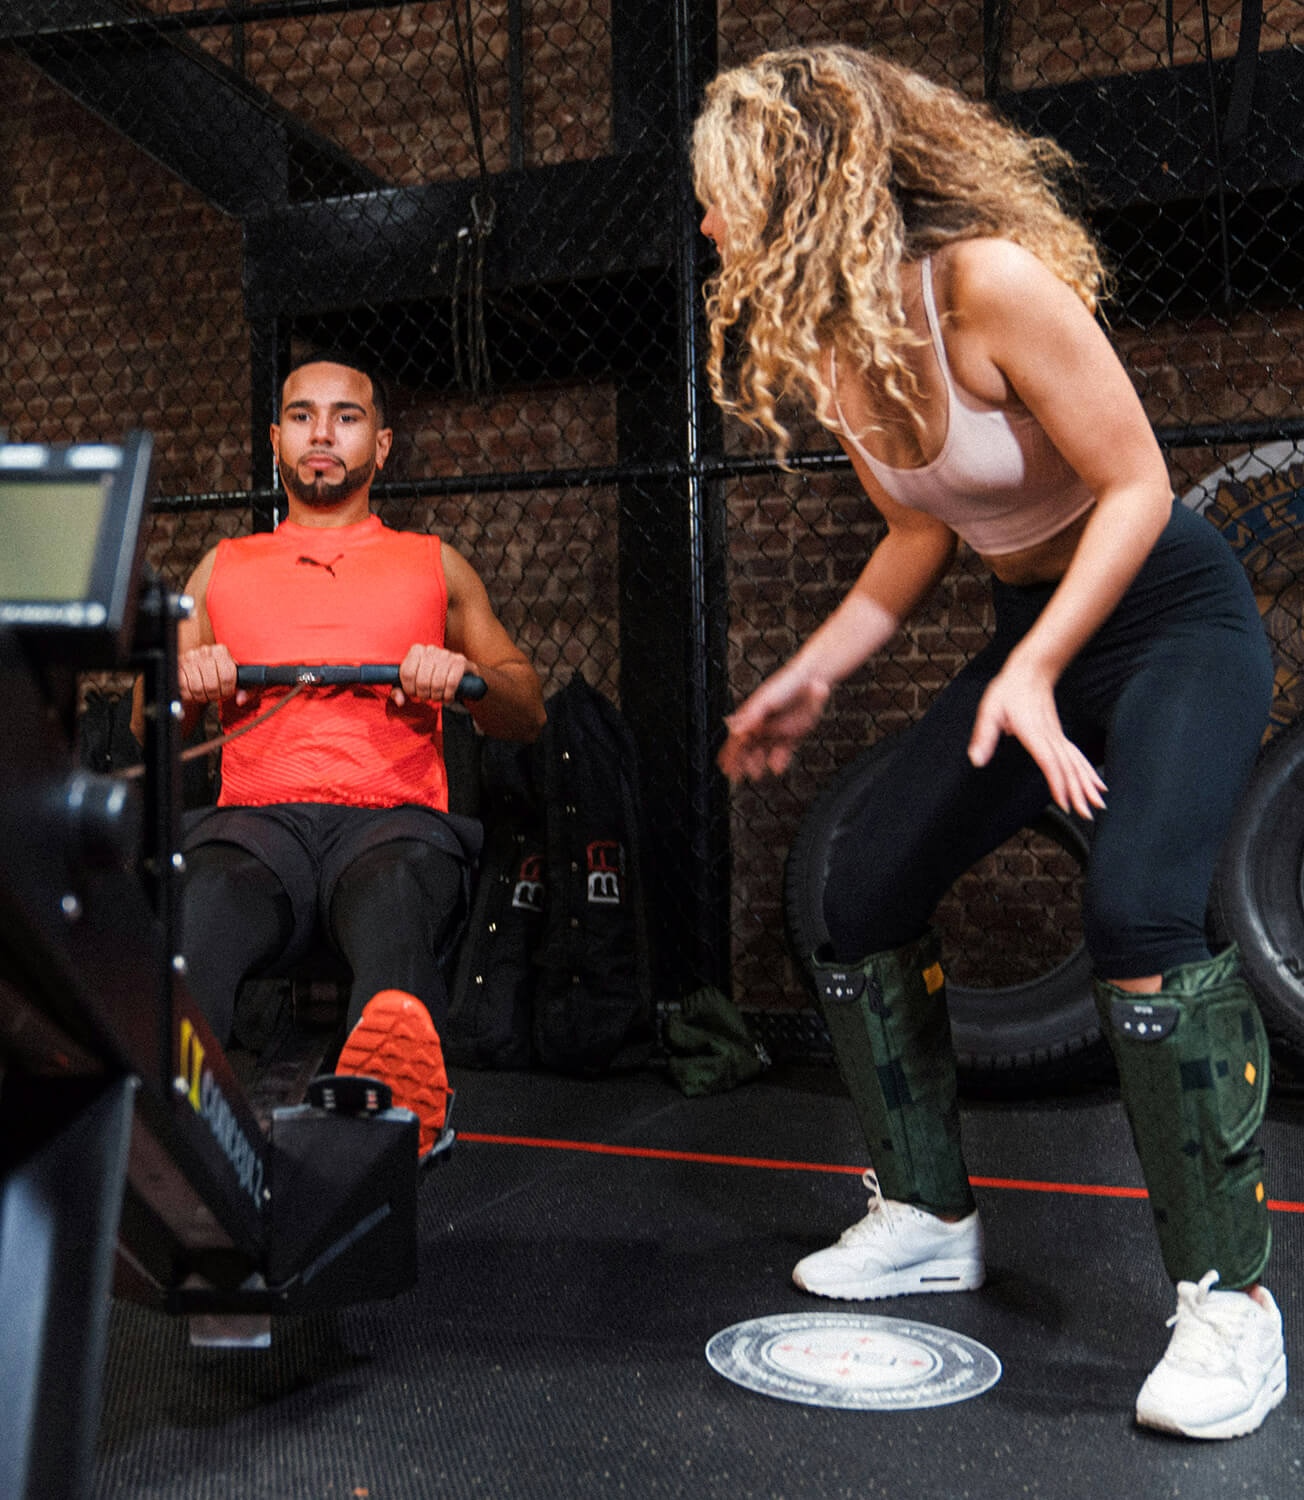 A woman encouraging her male friend as he exercises in the gym